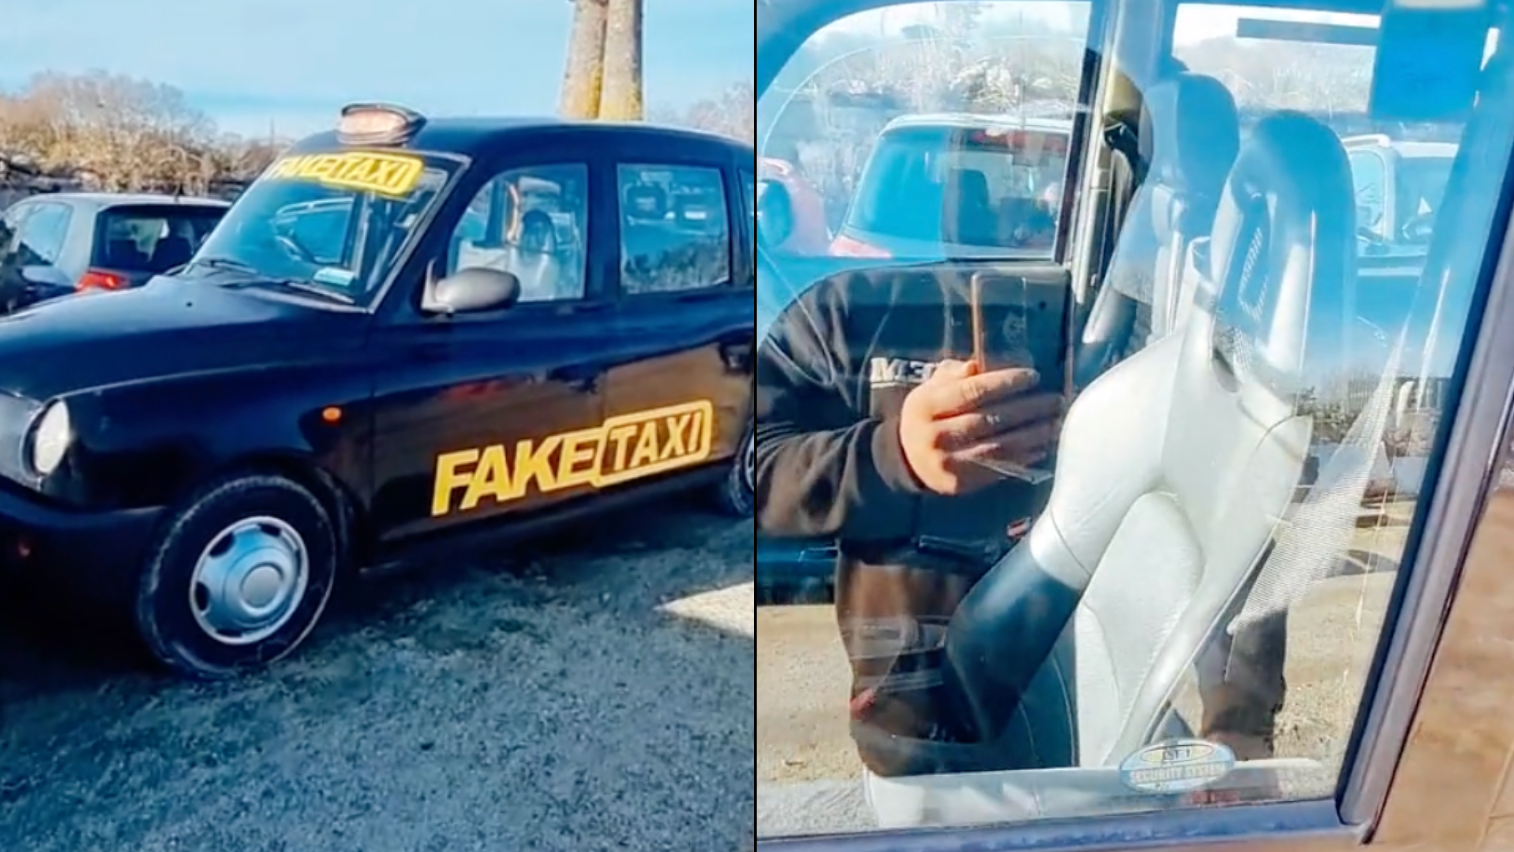 Guy who bought the Fake Taxi shows what the inside of it now looks